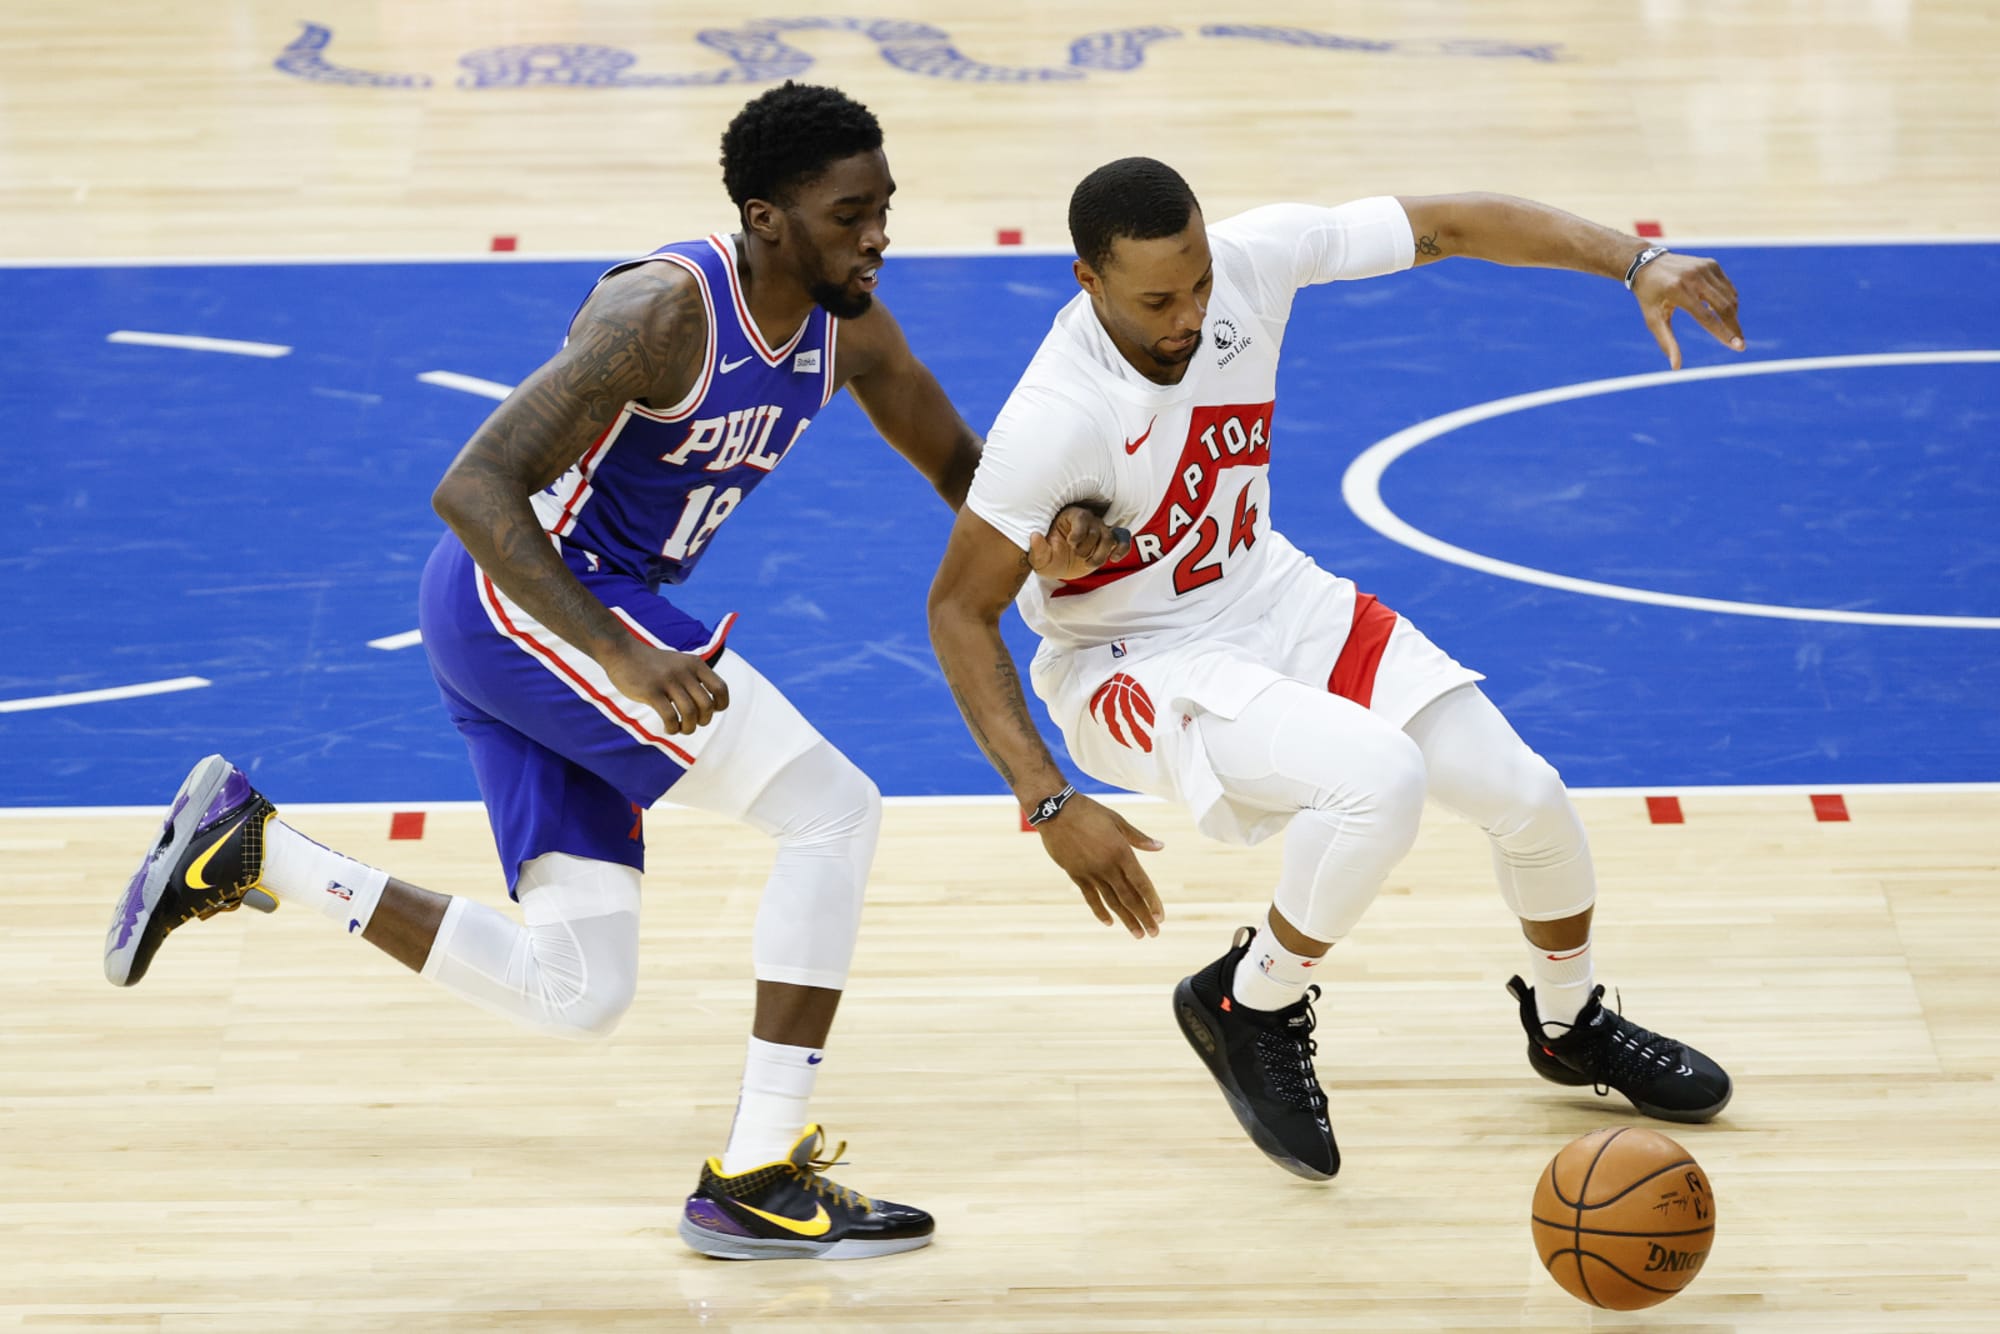 Three key takeaways from the Toronto Raptors’ painful loss against the Sixers